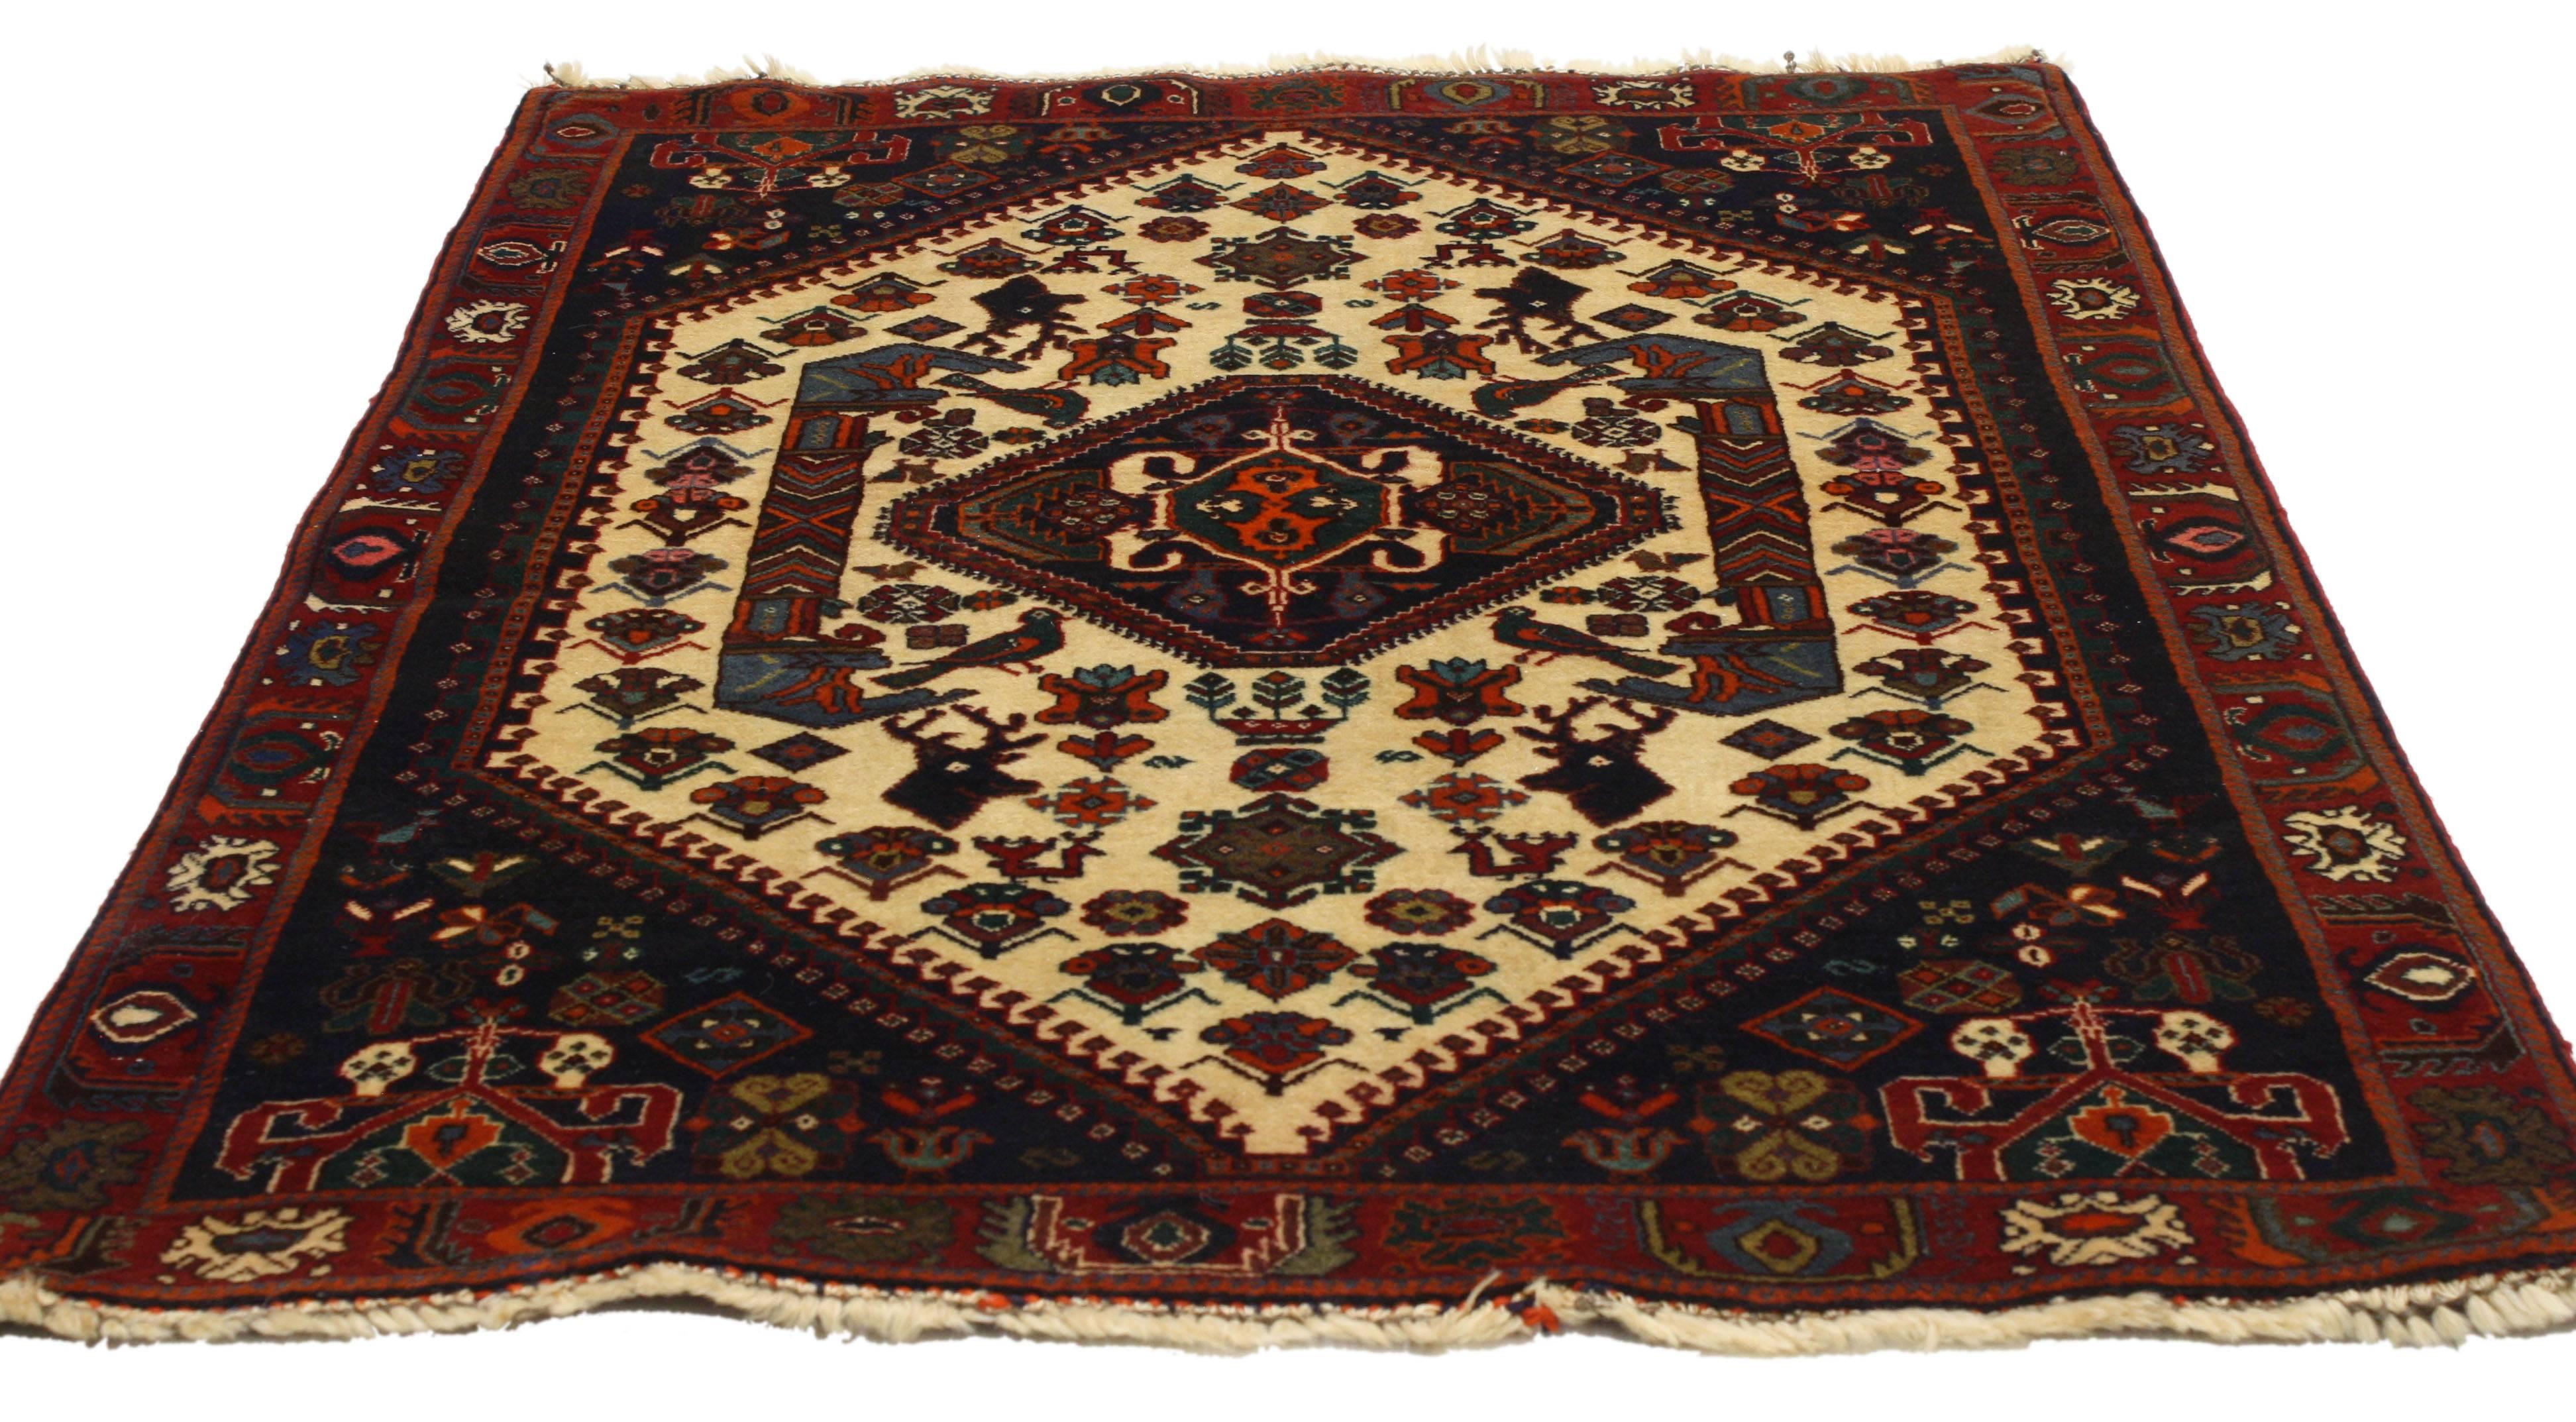 Vintage Persian Shiraz Rug with Modern Tribal Style In Good Condition For Sale In Dallas, TX